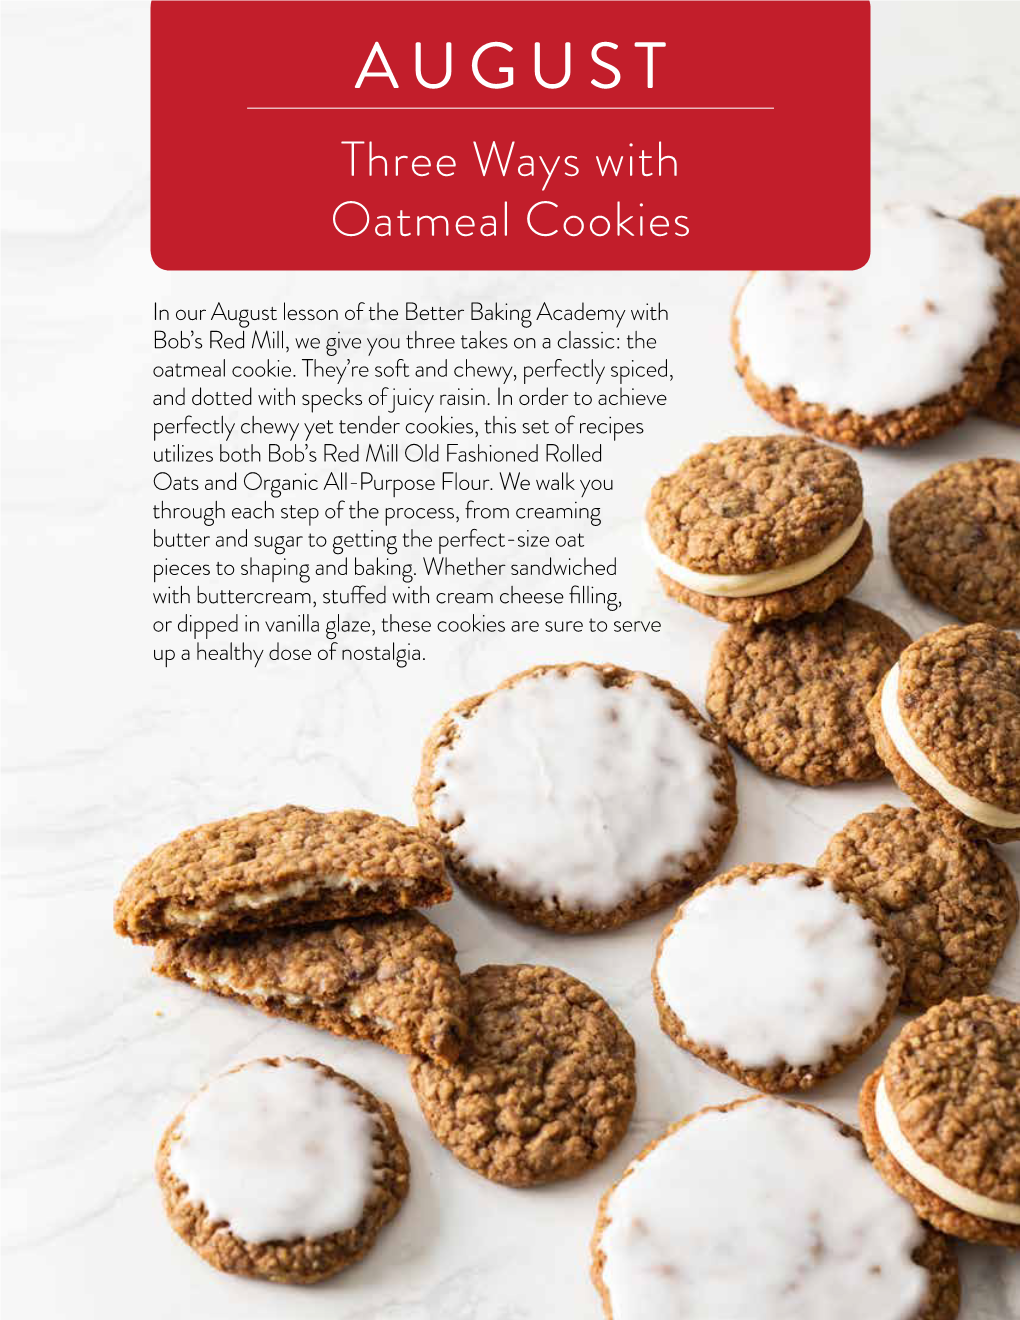 AUGUST Three Ways with Oatmeal Cookies